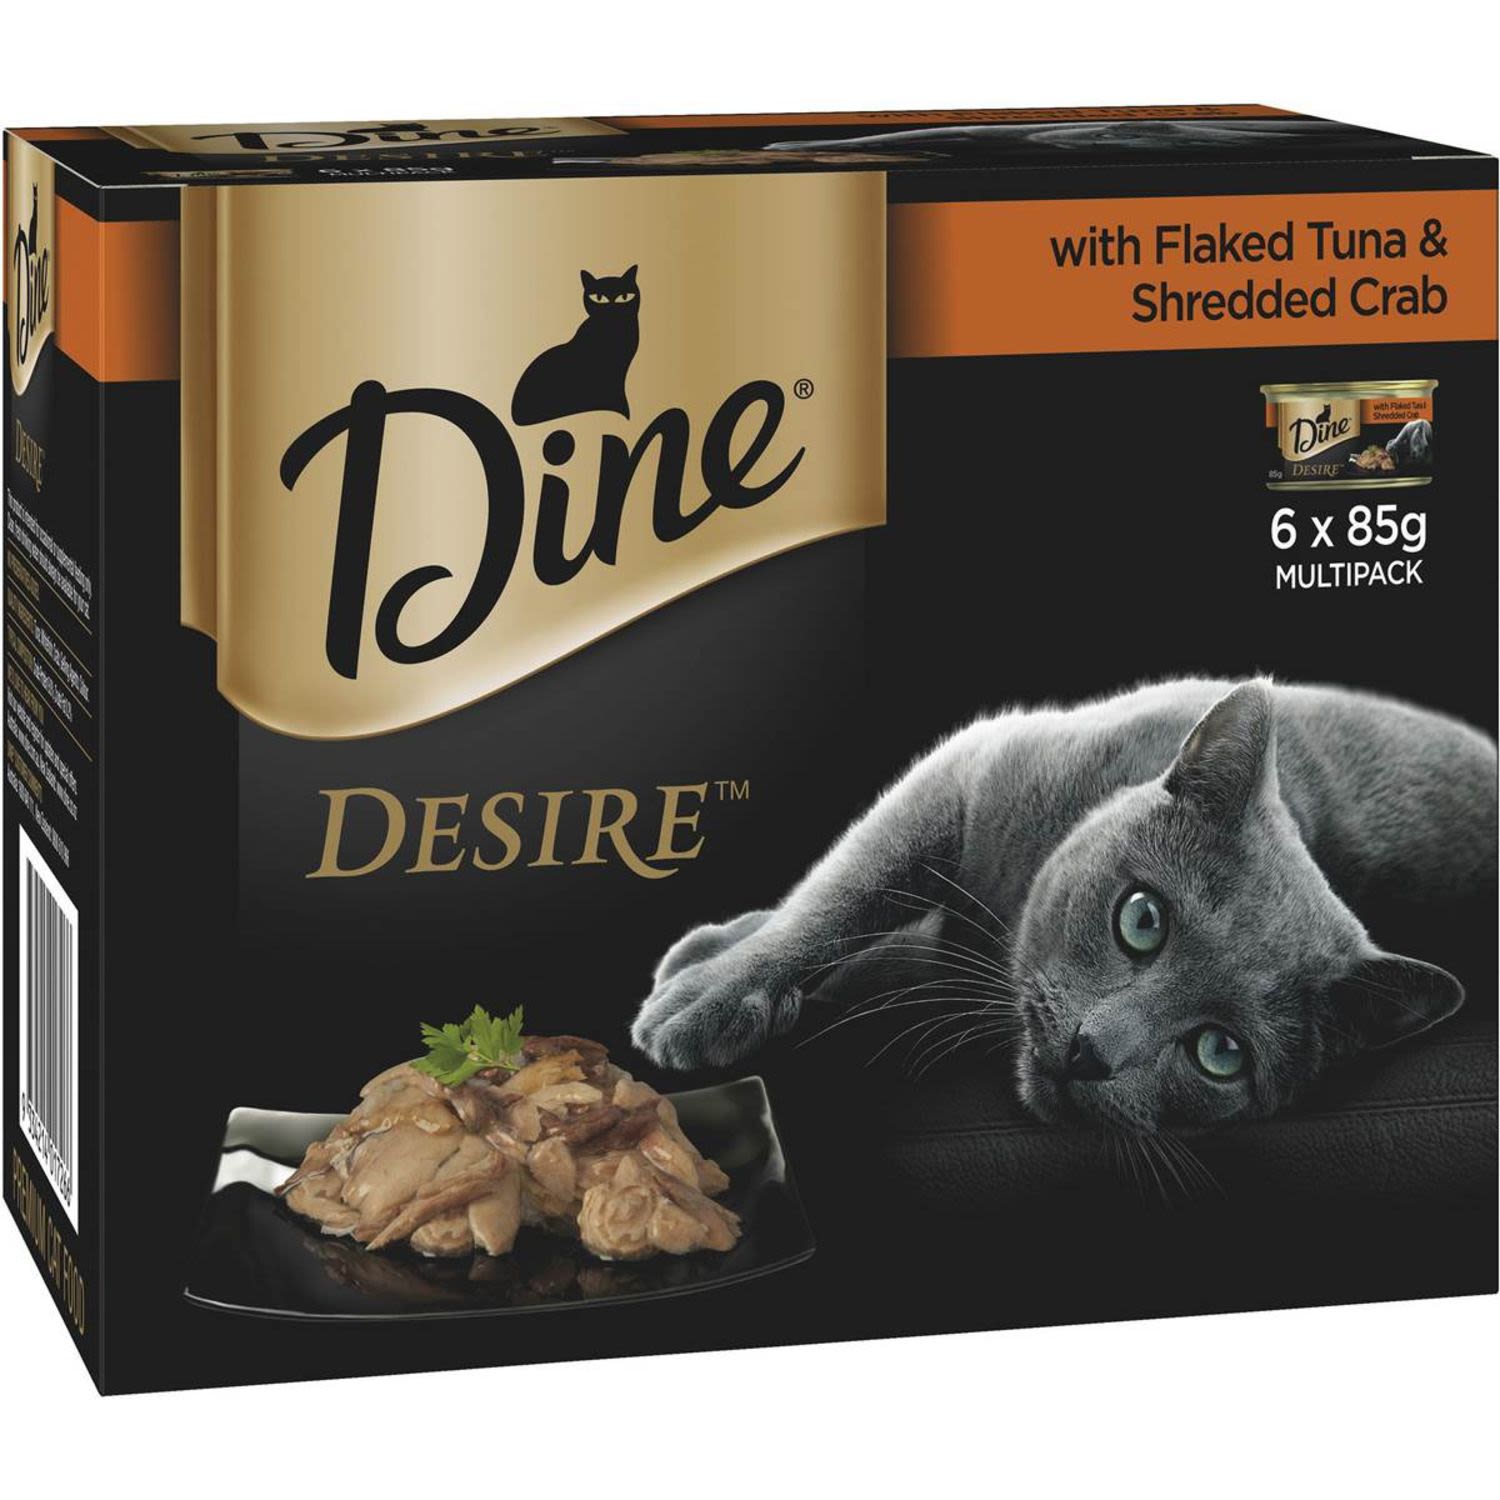 Dine Desire Wet Cat Food Flaked Tuna & Shredded Crab Can, 6 Each